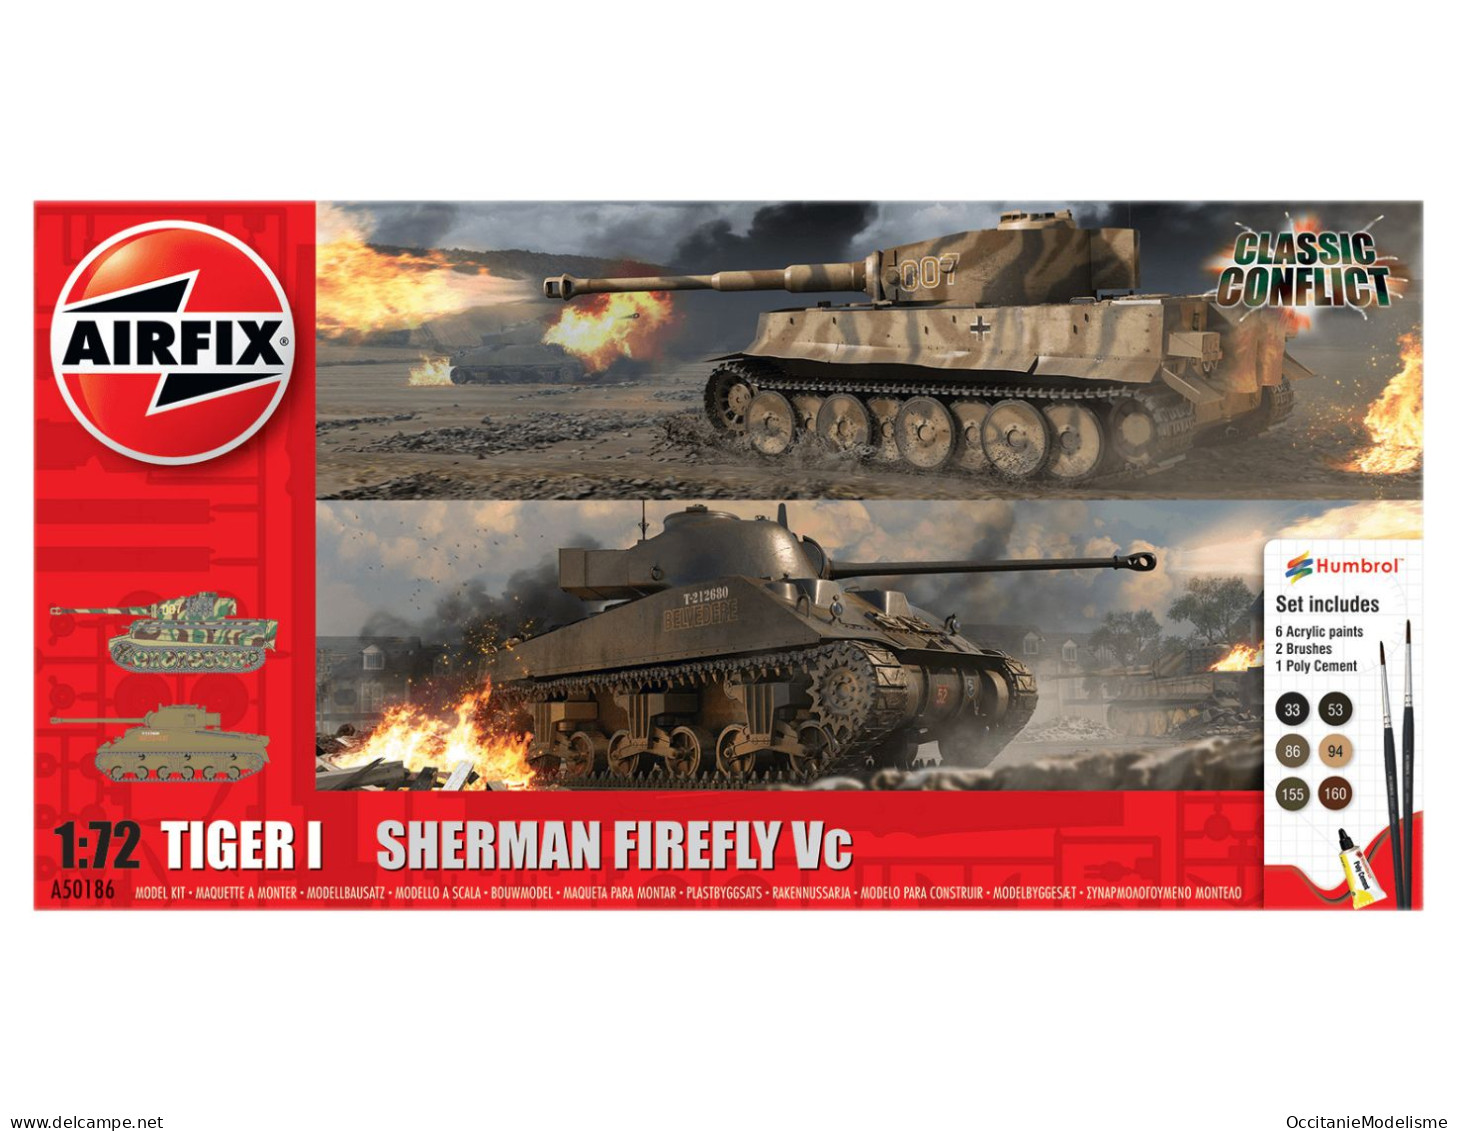 Airfix - Coffret TIGER I Vs SHERMAN FIREFLY Vc Maquettes + Peintures + Colle Réf. A50186 Neuf NBO 1/72 - Vehículos Militares